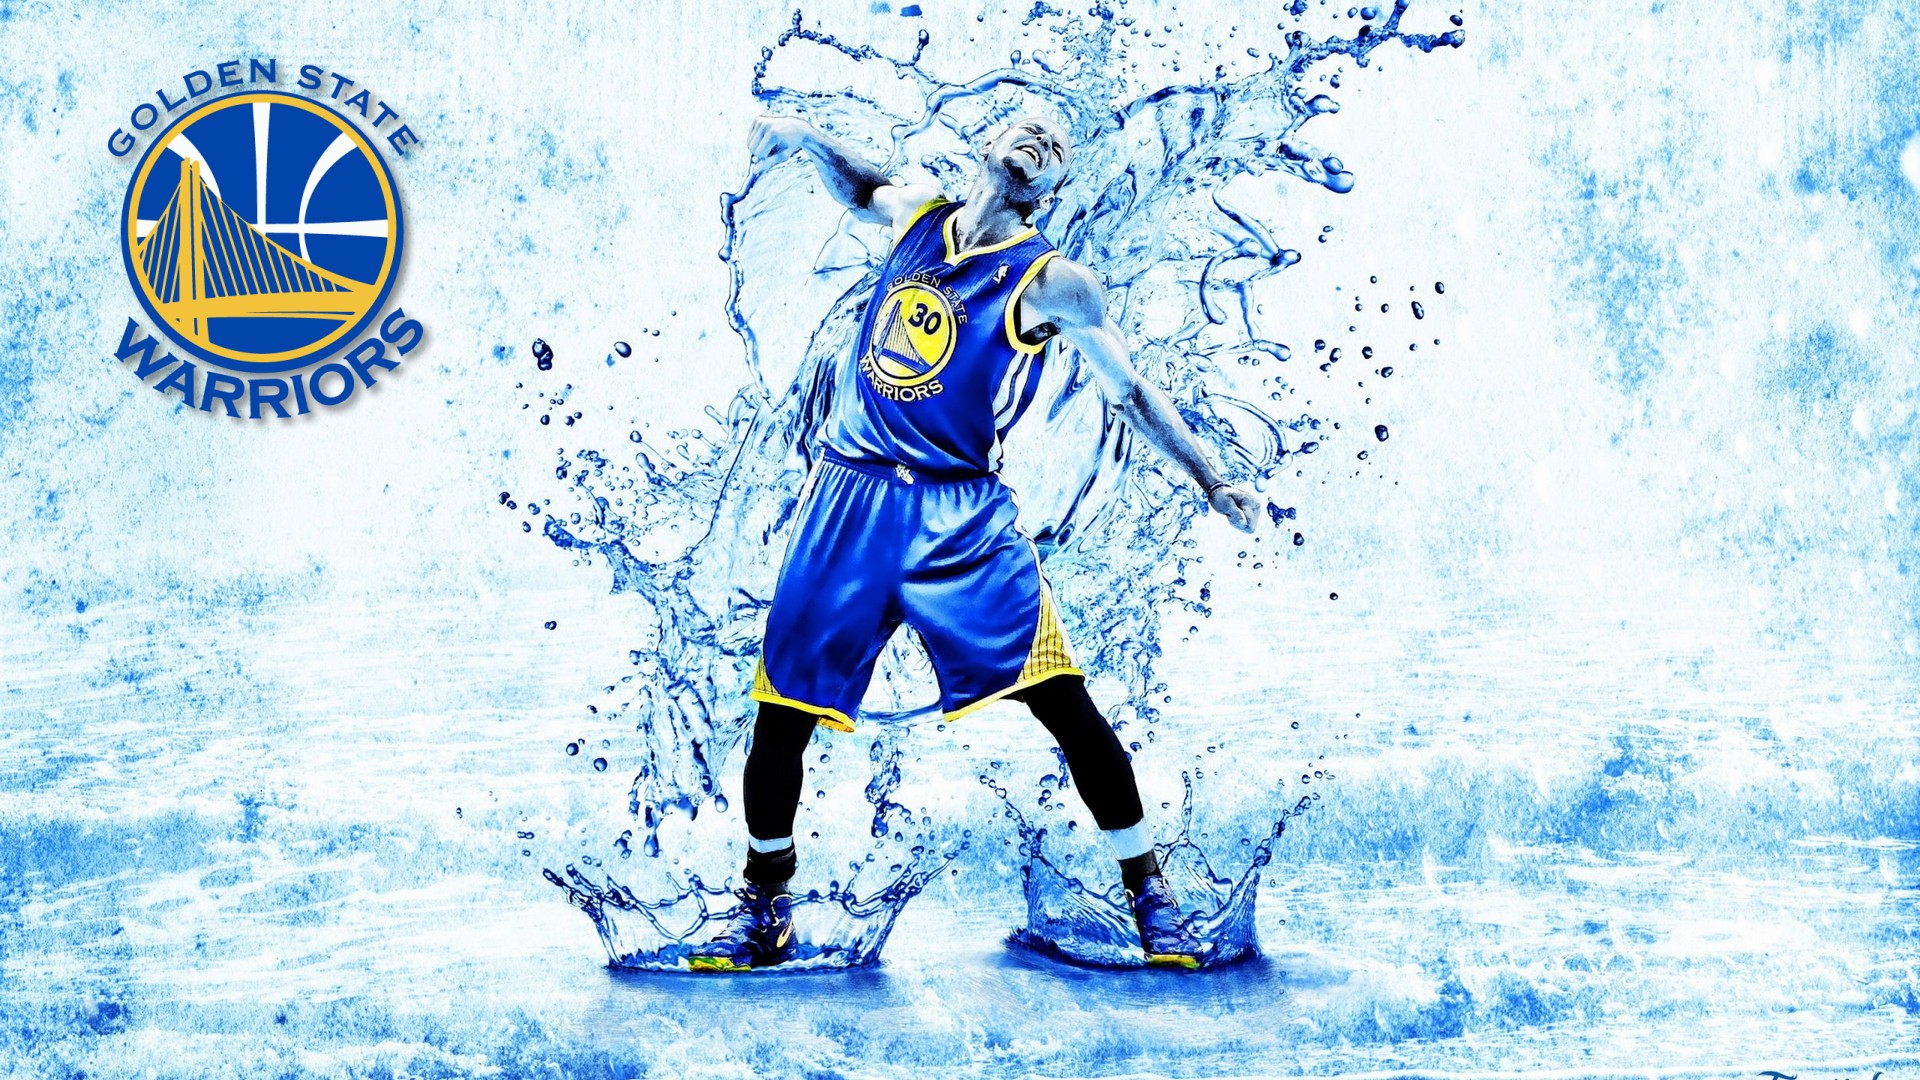 Stephen Curry HD Wallpapers with image dimensions 1920x1080 pixel. You can make this wallpaper for your Desktop Computer Backgrounds, Windows or Mac Screensavers, iPhone Lock screen, Tablet or Android and another Mobile Phone device